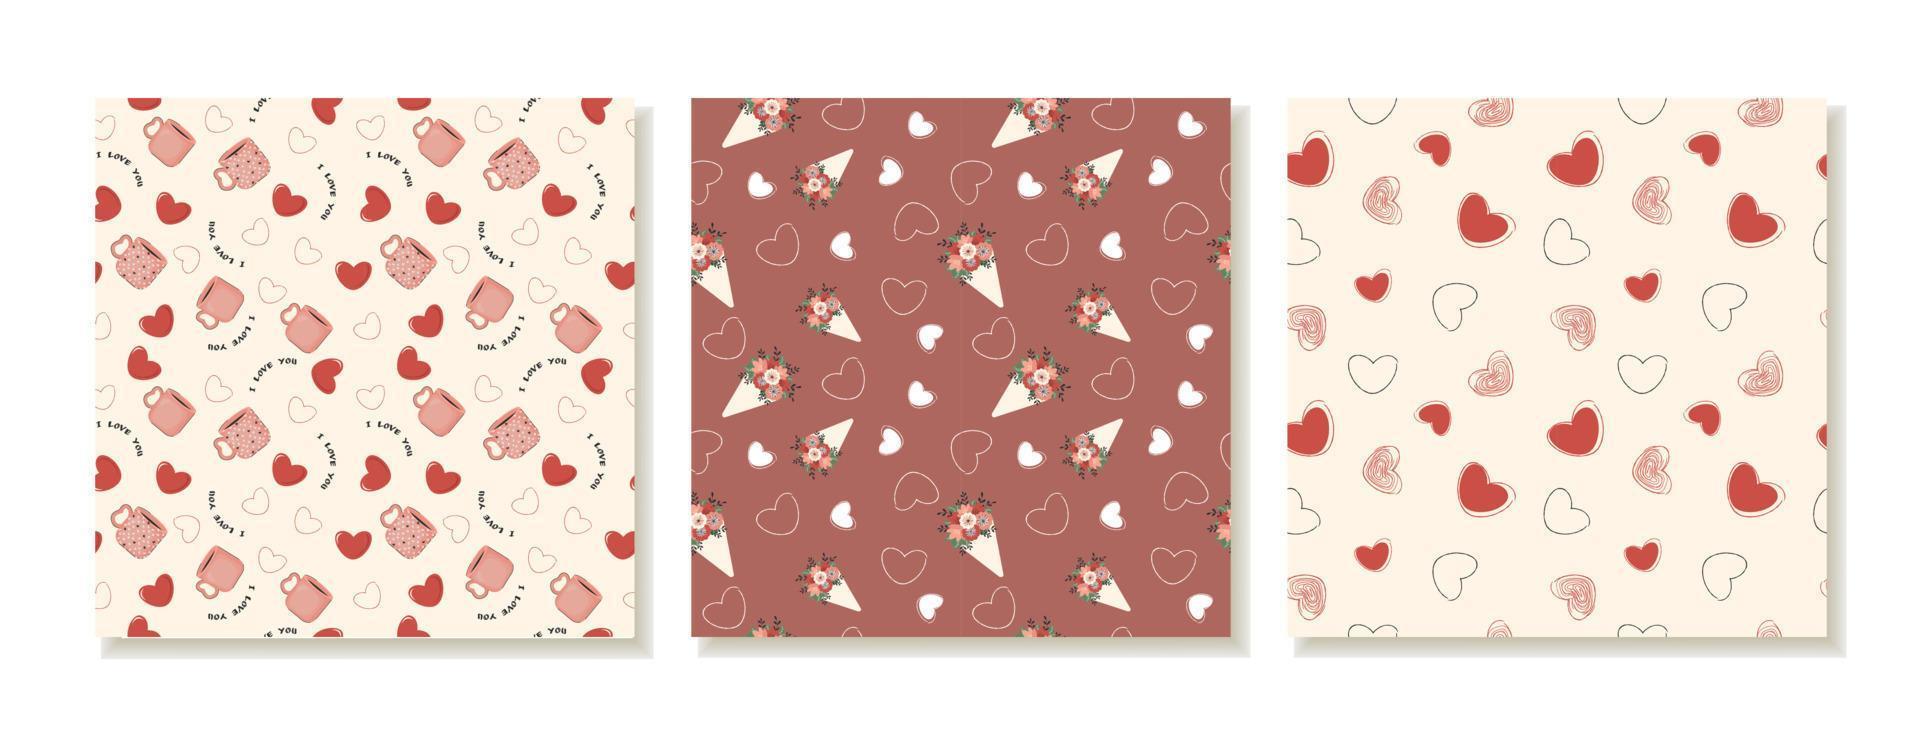 A set of seamless Valentine's Day patterns. Romantic patterns, backgrounds for social media and posts with bouquets, love mugs and hearts. Vector